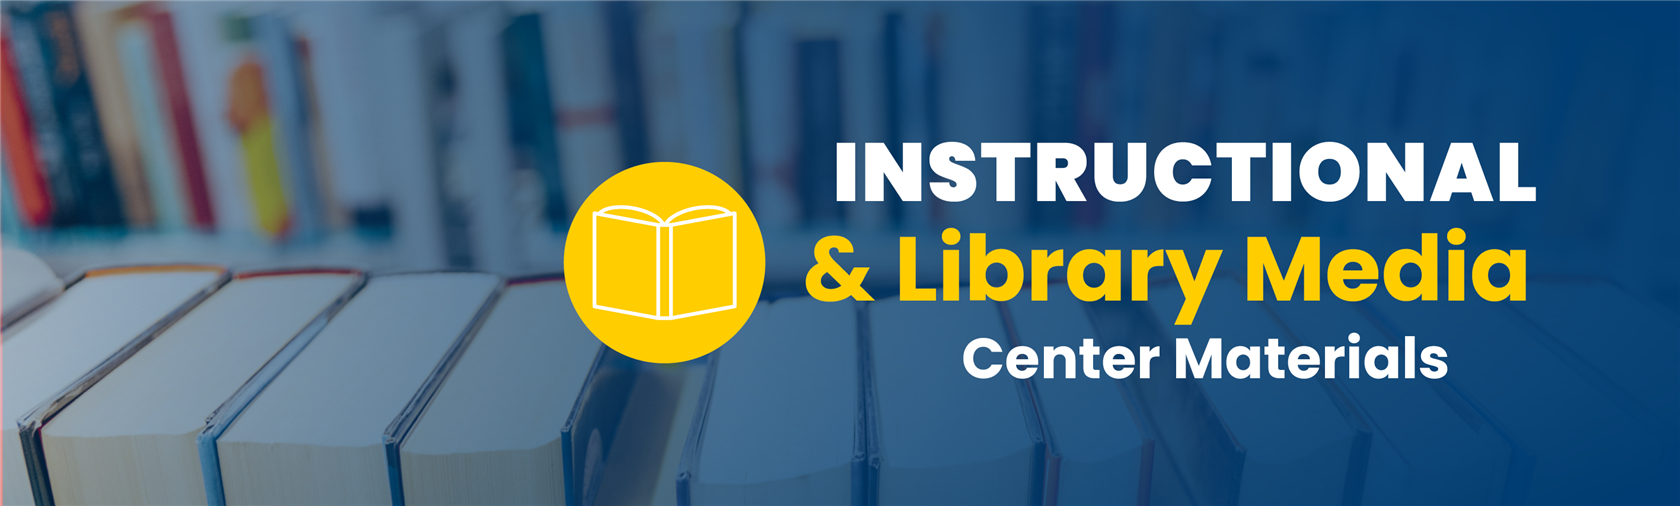 Instructional and Library Media Center Materials